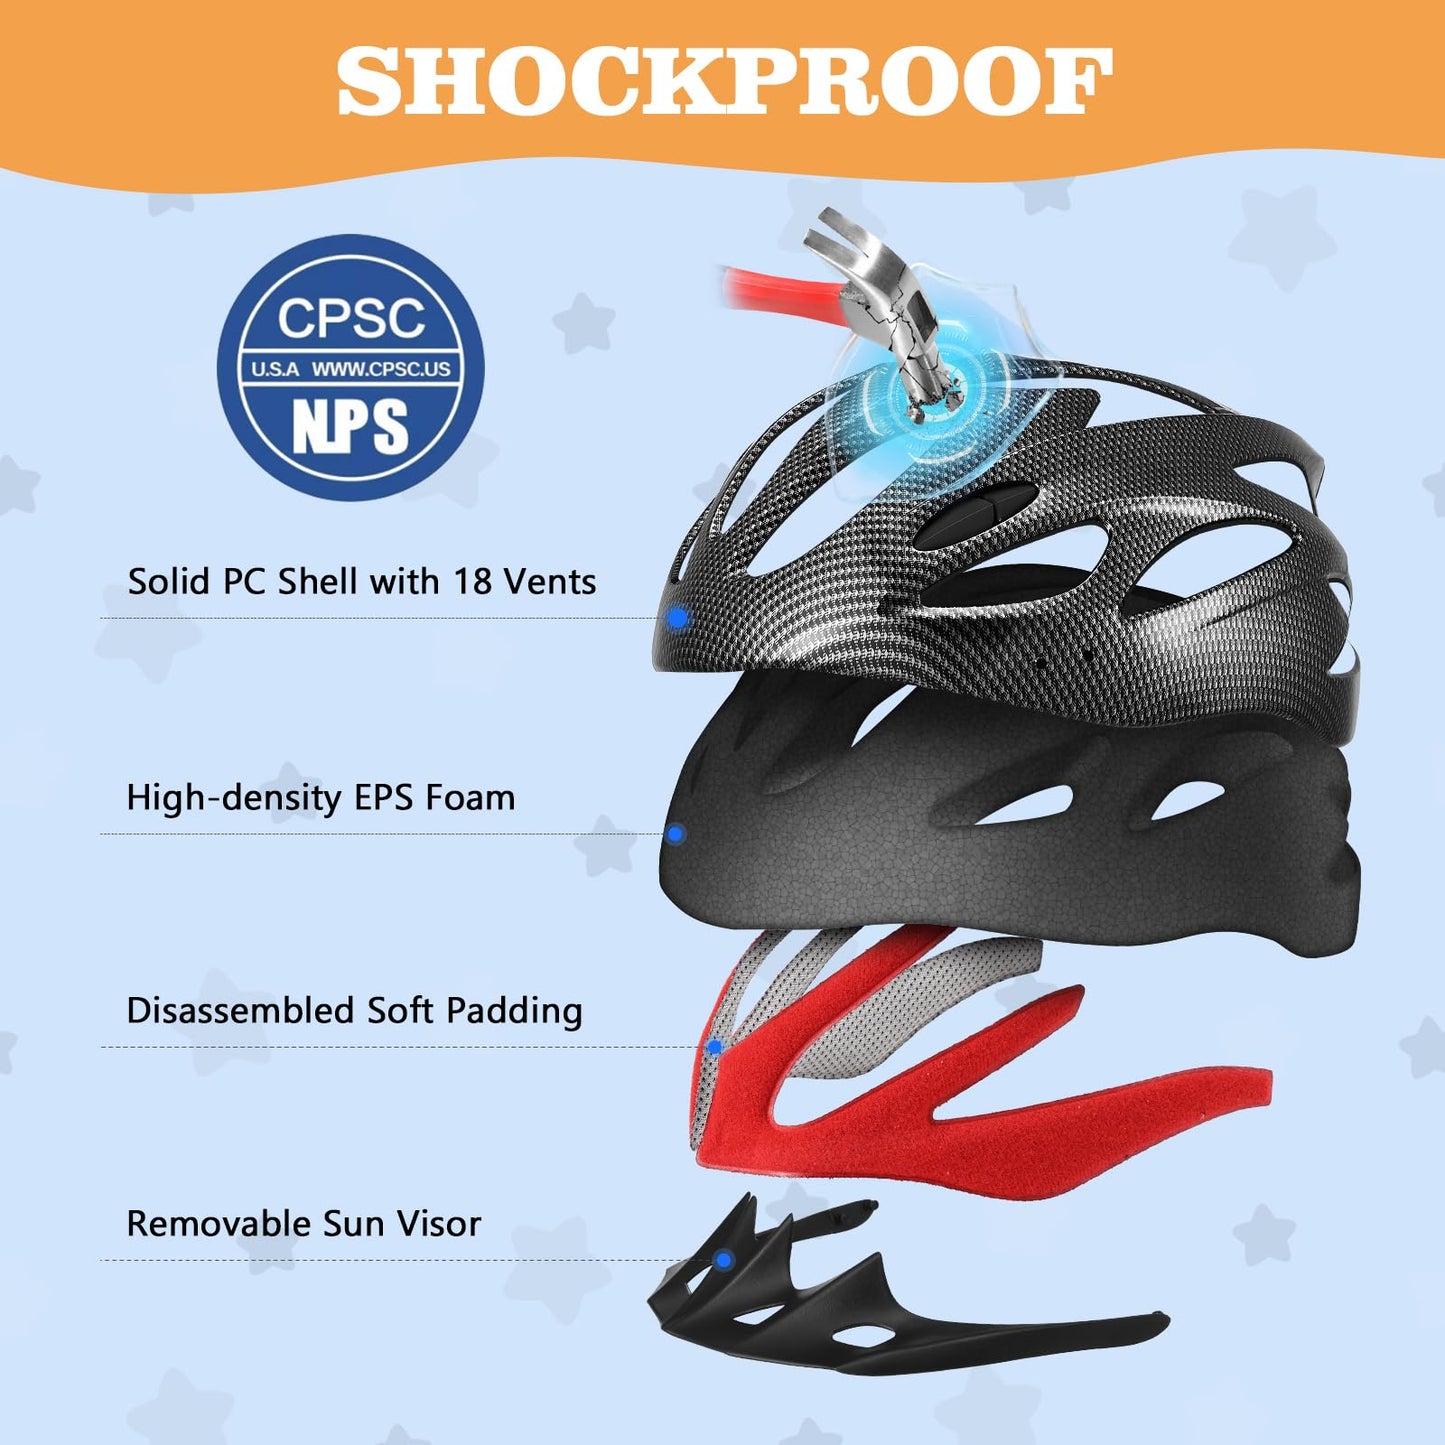 Zacro Kids Bike Helmet - Boys and Girls Youth Bike Helmets Fits Ages 5-8/8-14 Year Olds, Dial Fit Adjustment & Detachable Visor, Lightweight Bicycle Helmet for Mountain Cycling CPSC Safety Certified